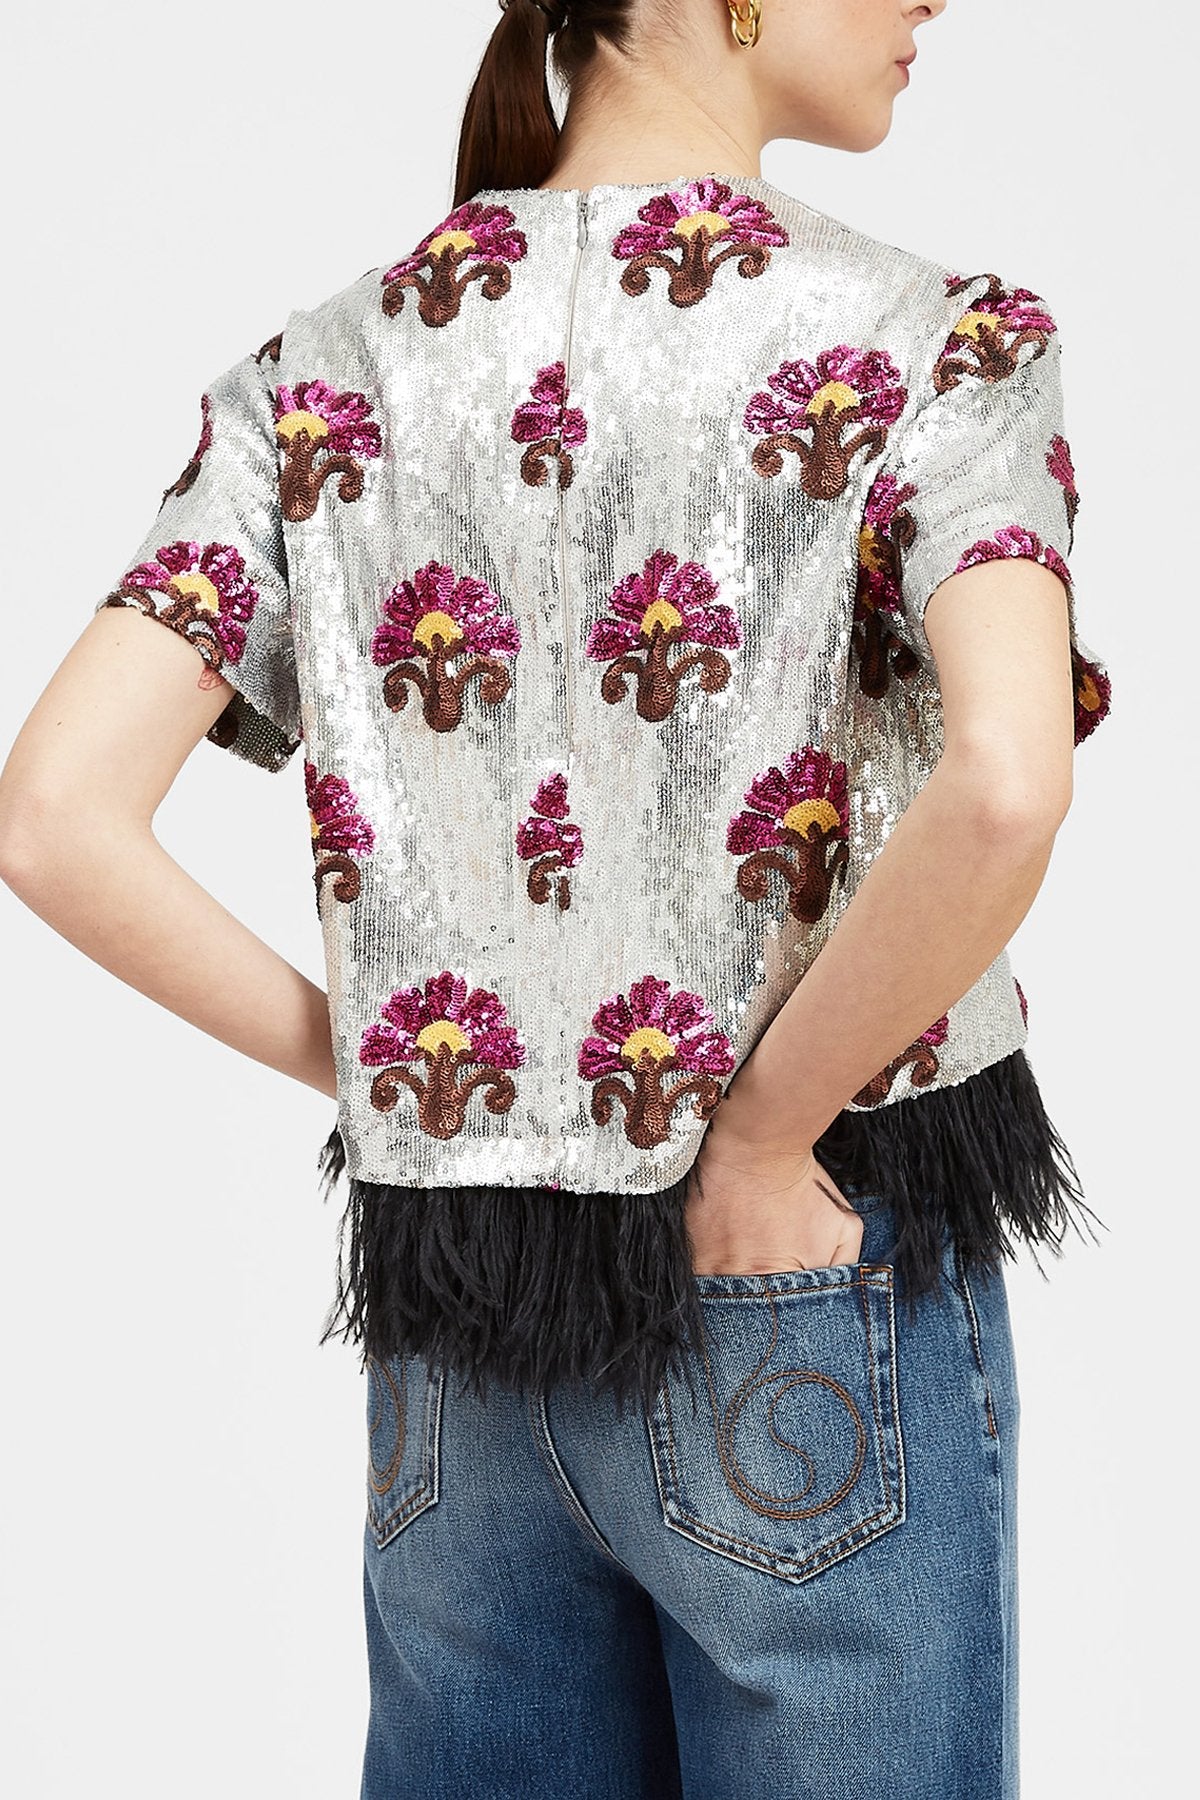 La Scala Tee with Feathers in Textured Sequins - shop-olivia.com